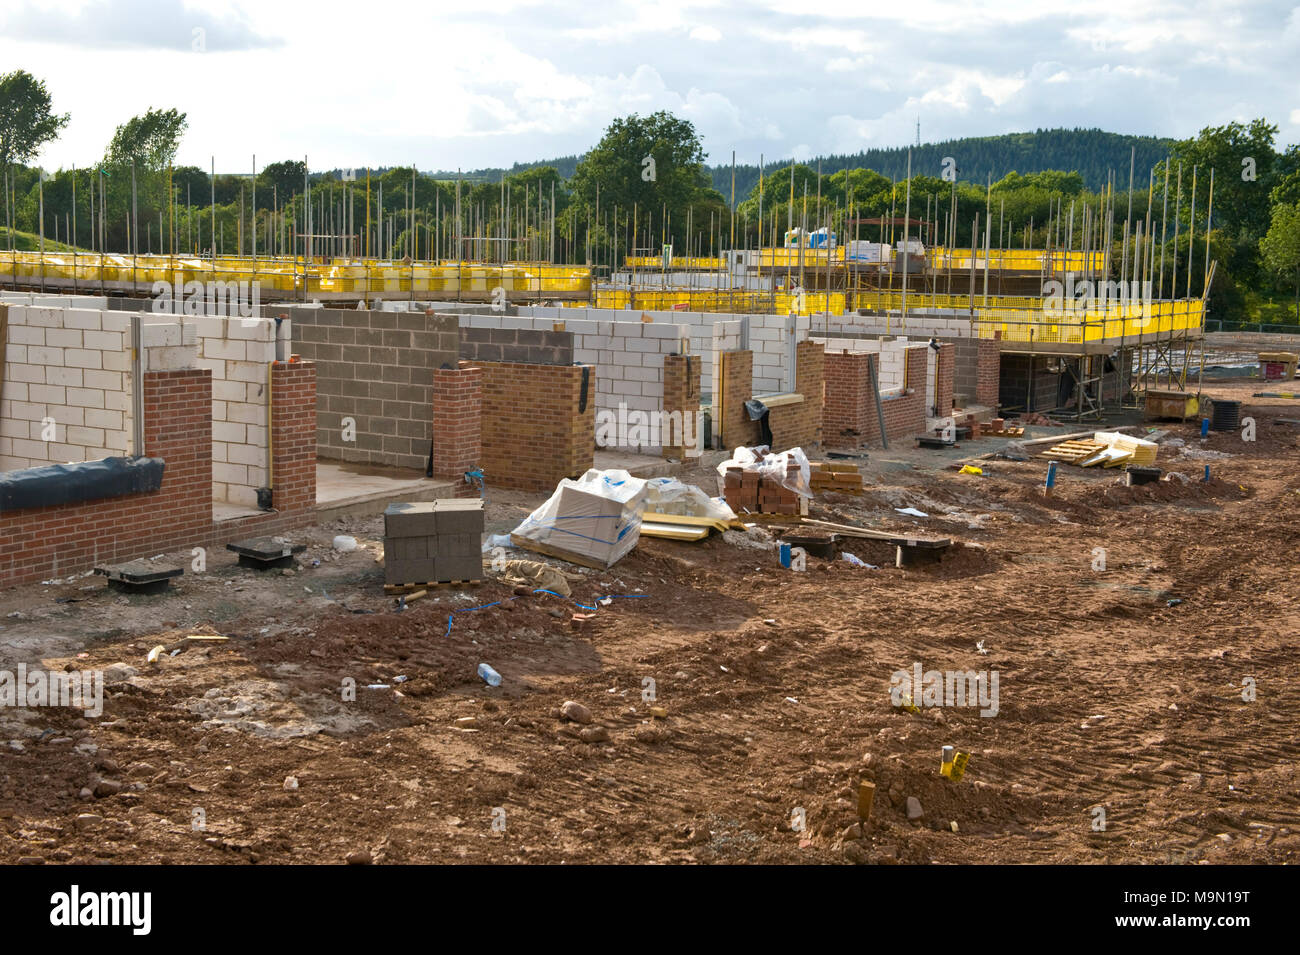 Persimmon homes Readers Retreat site houses under construction on a greenfield site at Hay on Wye Powys Wales UK Stock Photo